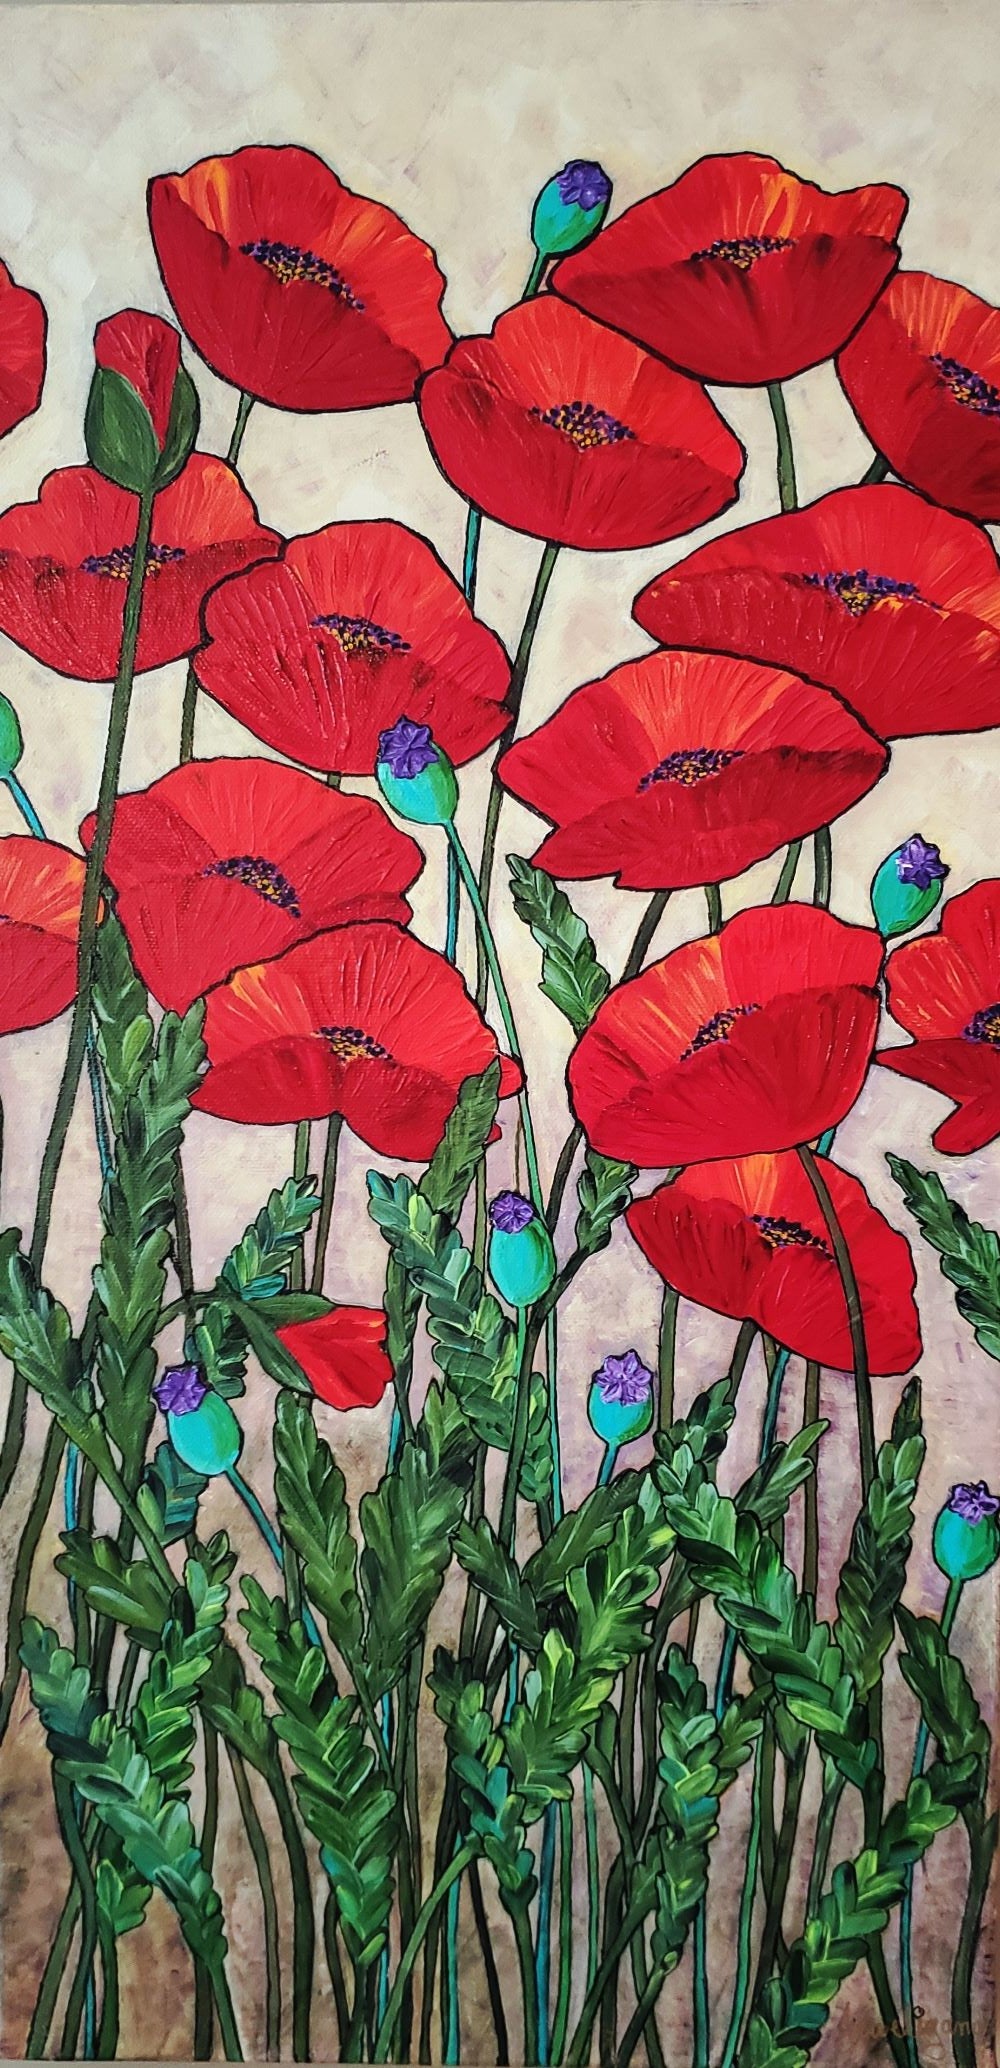 Painting of red poppies